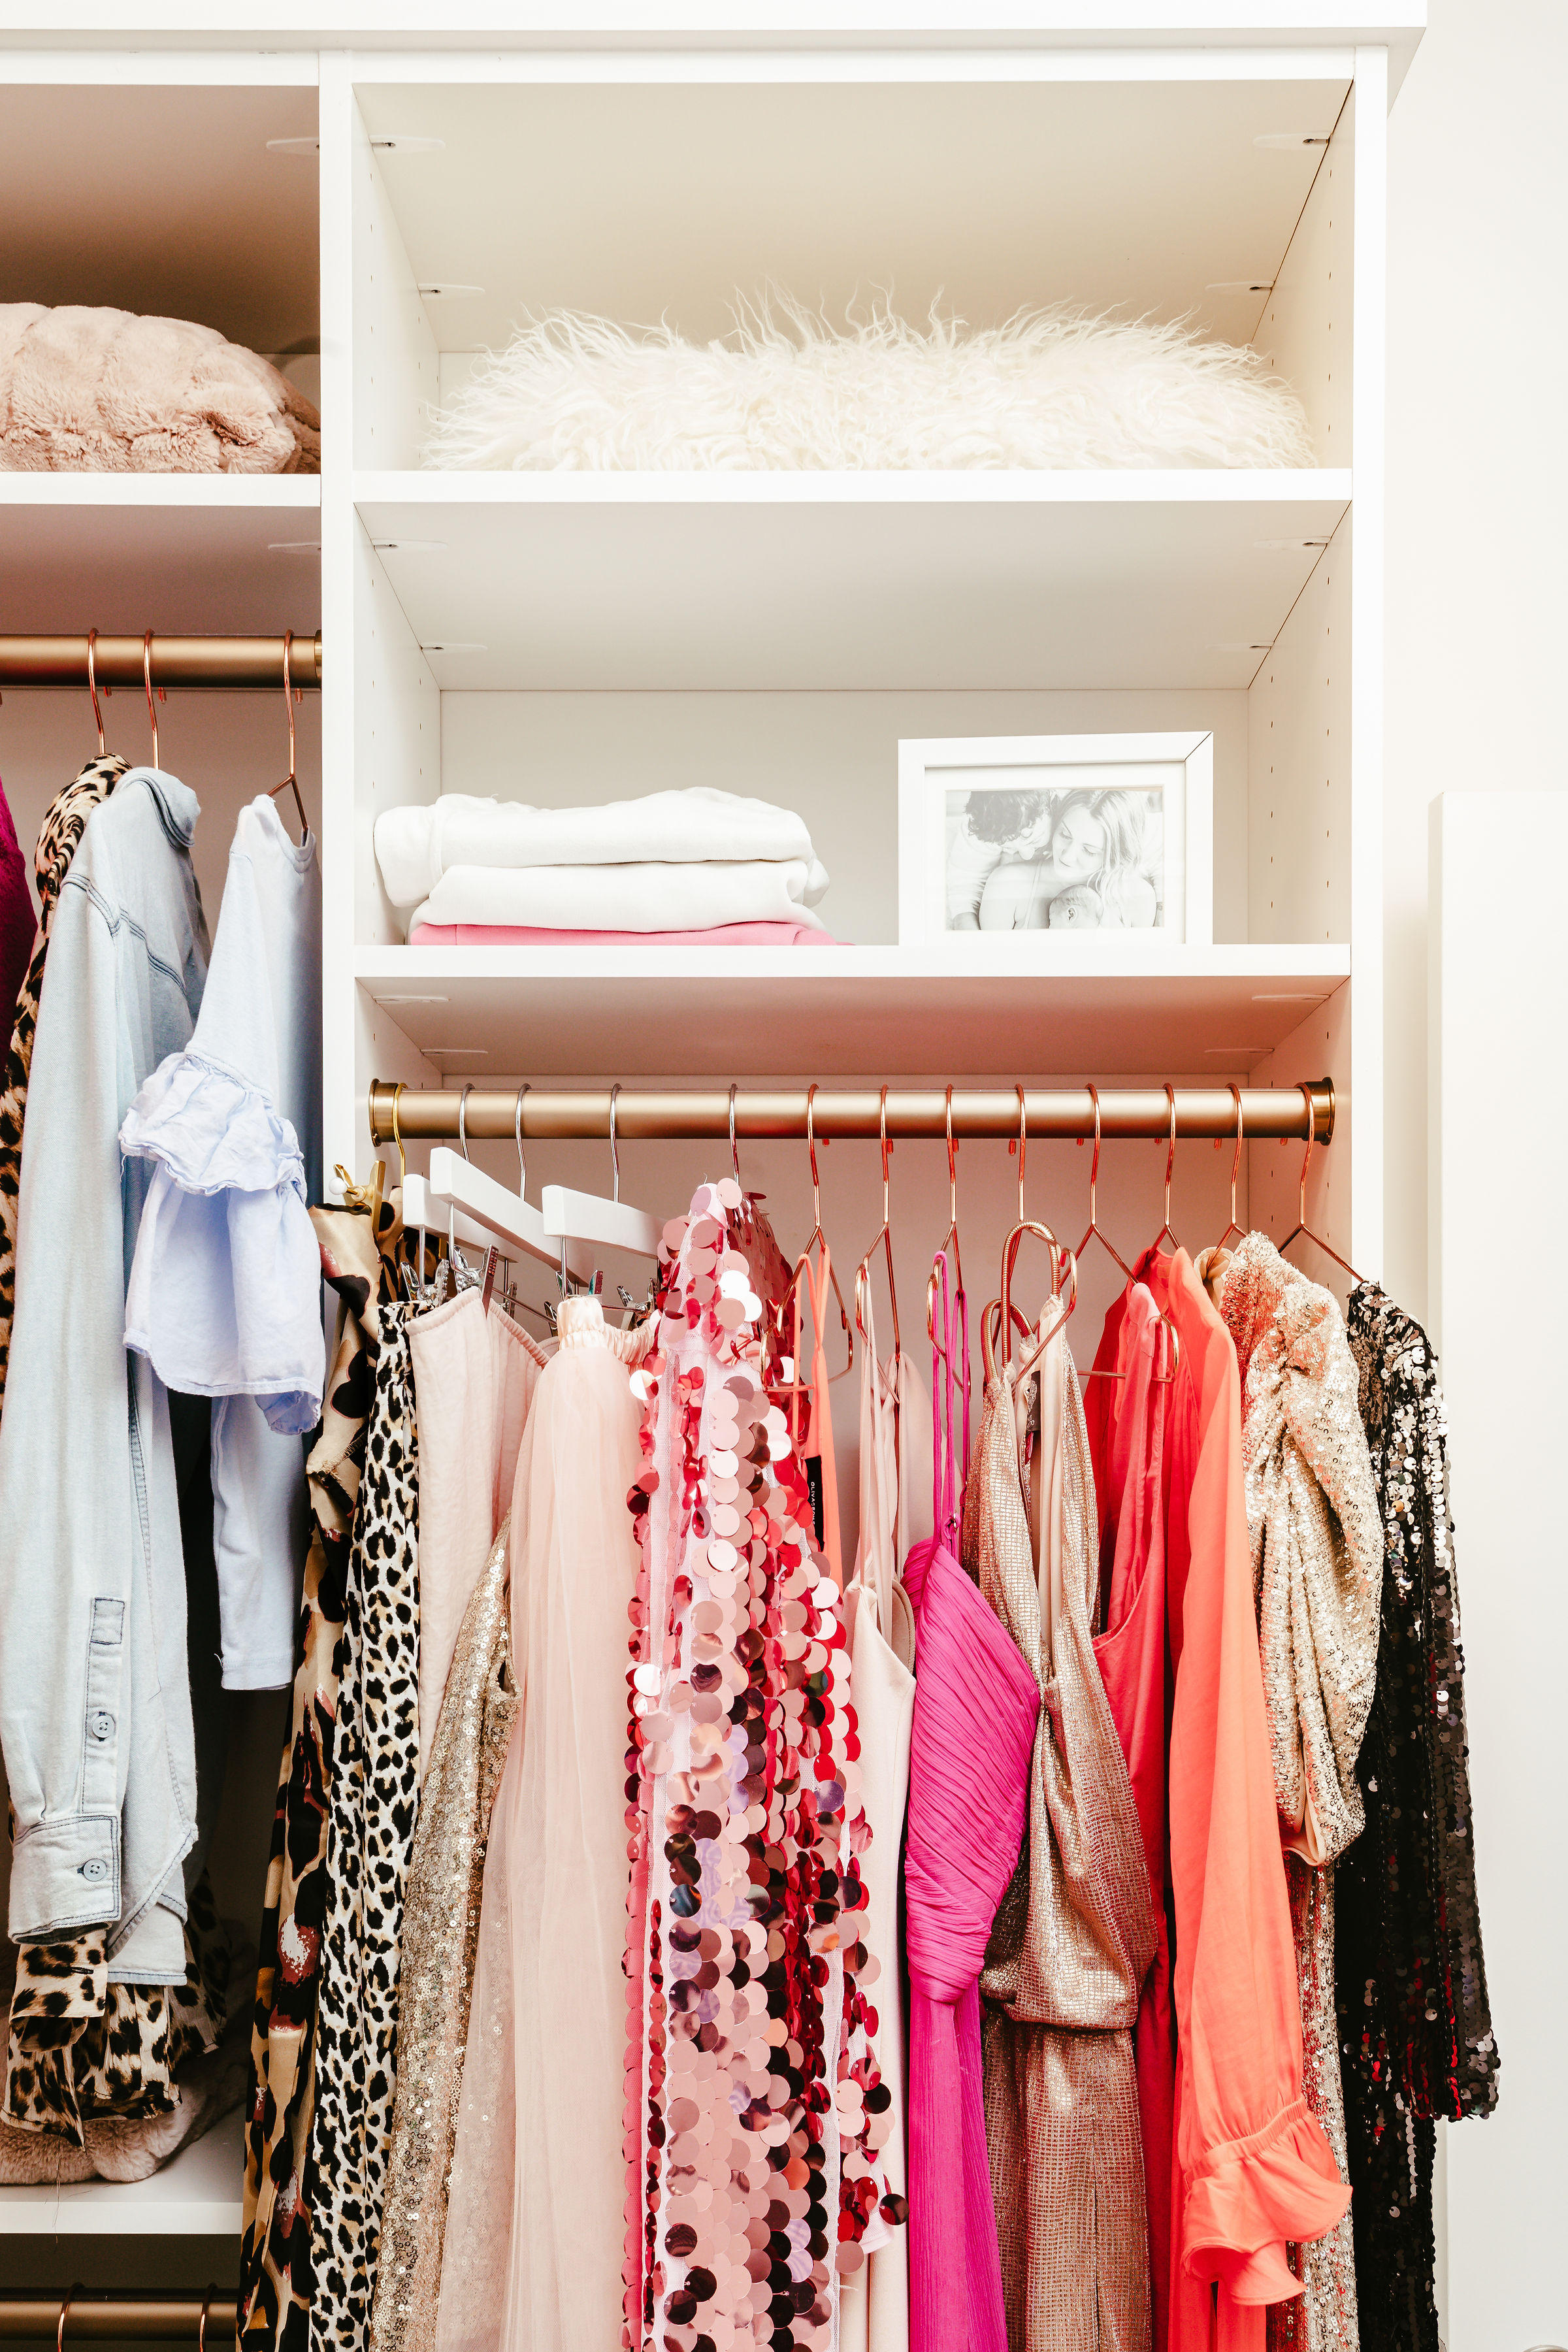 Custom Closets Are Designed To Fit YOUR Clothes! The Tailored Closet of Winnipeg South Winnipeg (204)808-8852